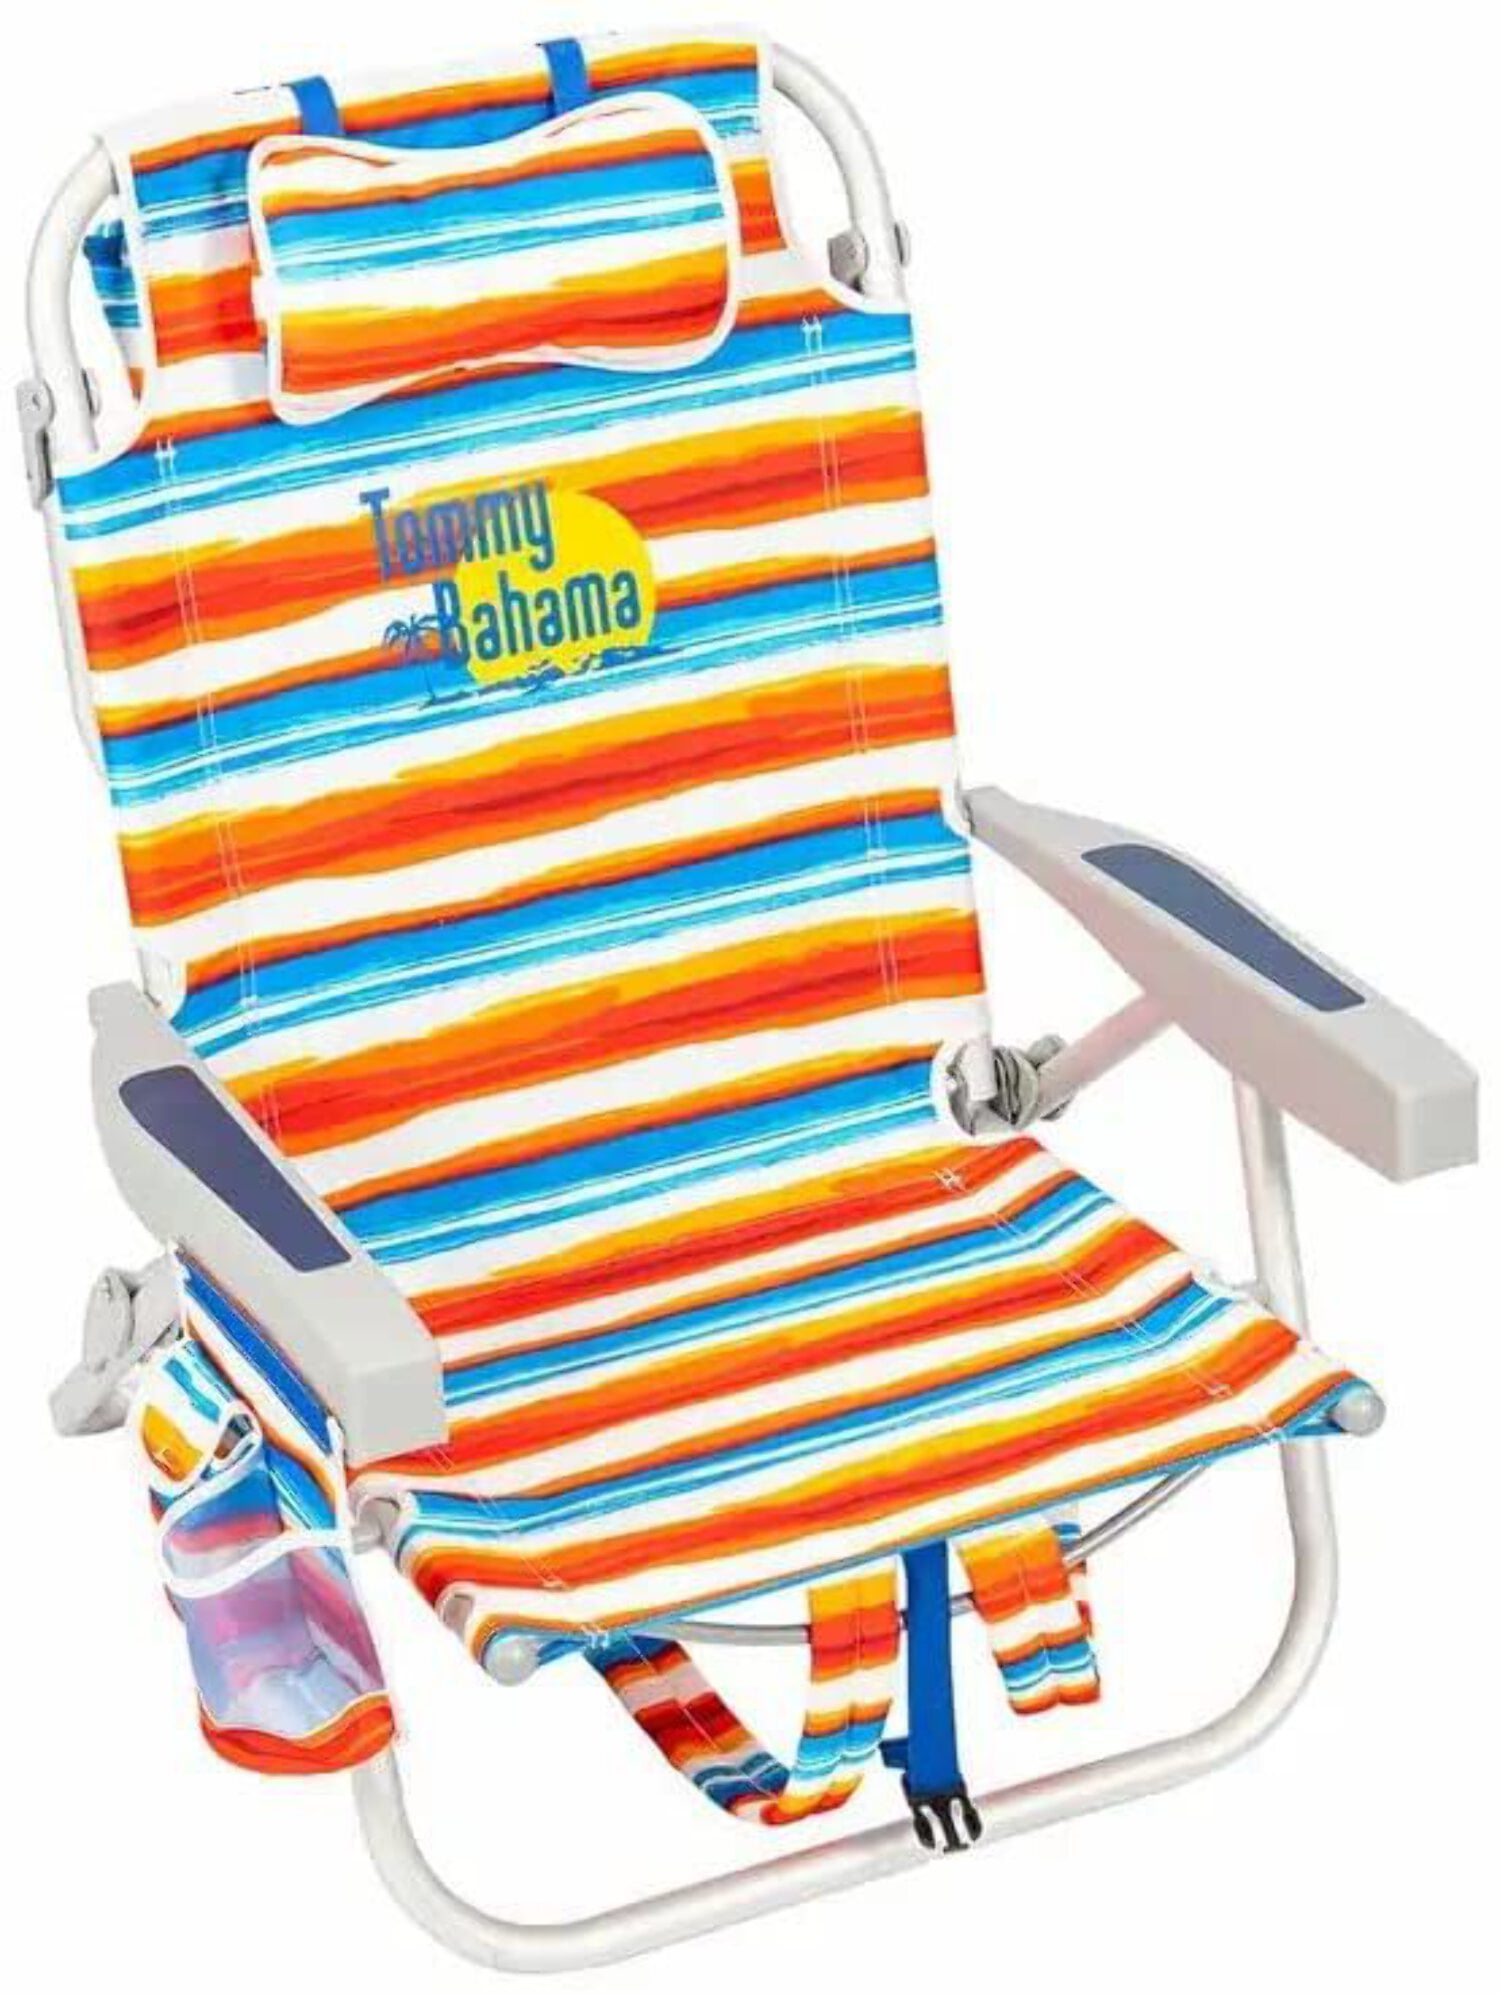 Tommy Bahama Backpack Beach Chair Portable Seat with Drink Holder & Phone Pocket 